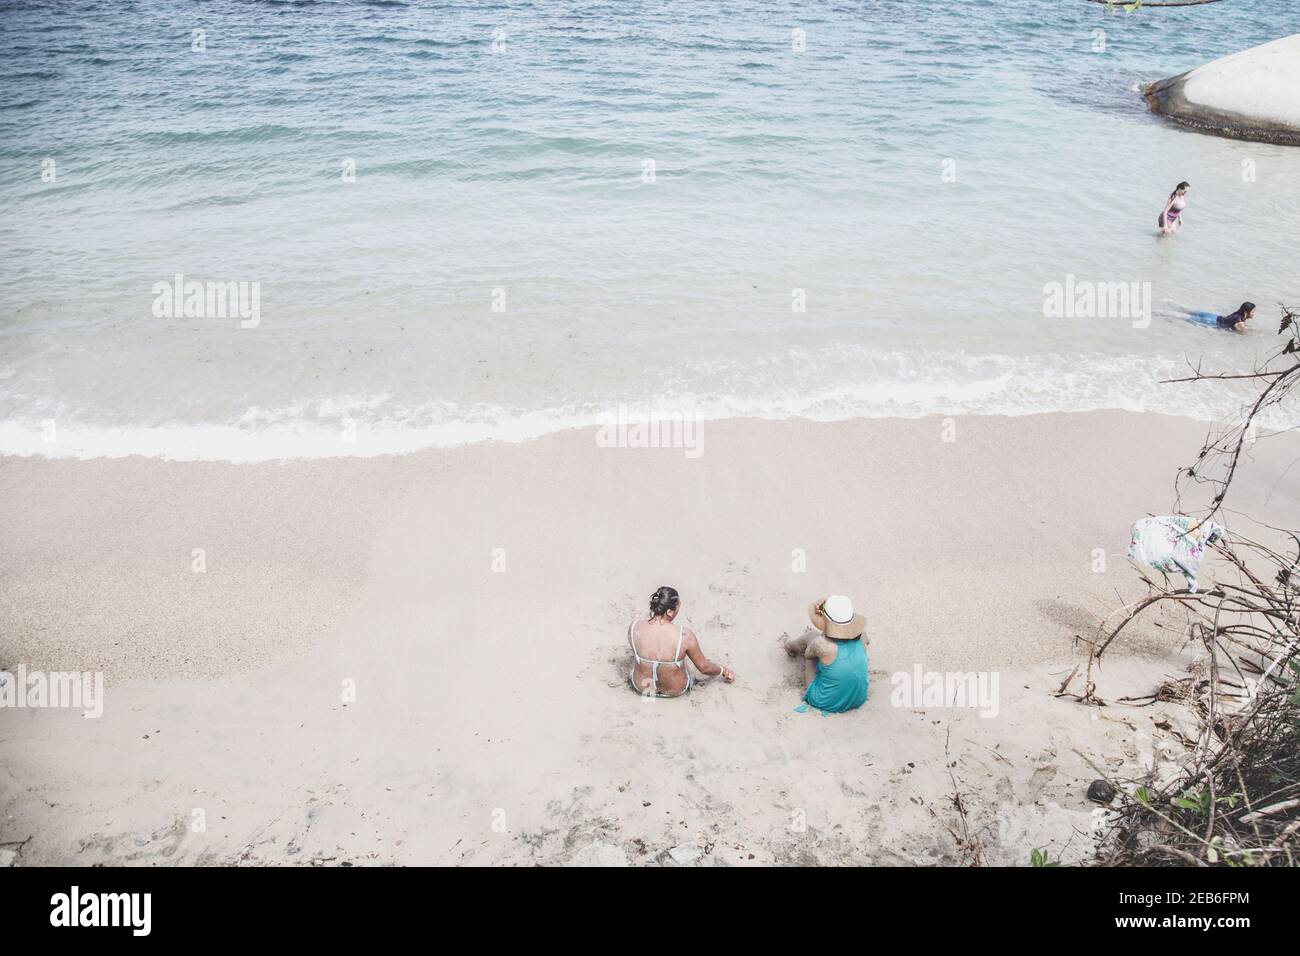 ST MARTA, COLOMBIA - Dec 10, 2020: People seating on the beach, enjoying quite time Stock Photo